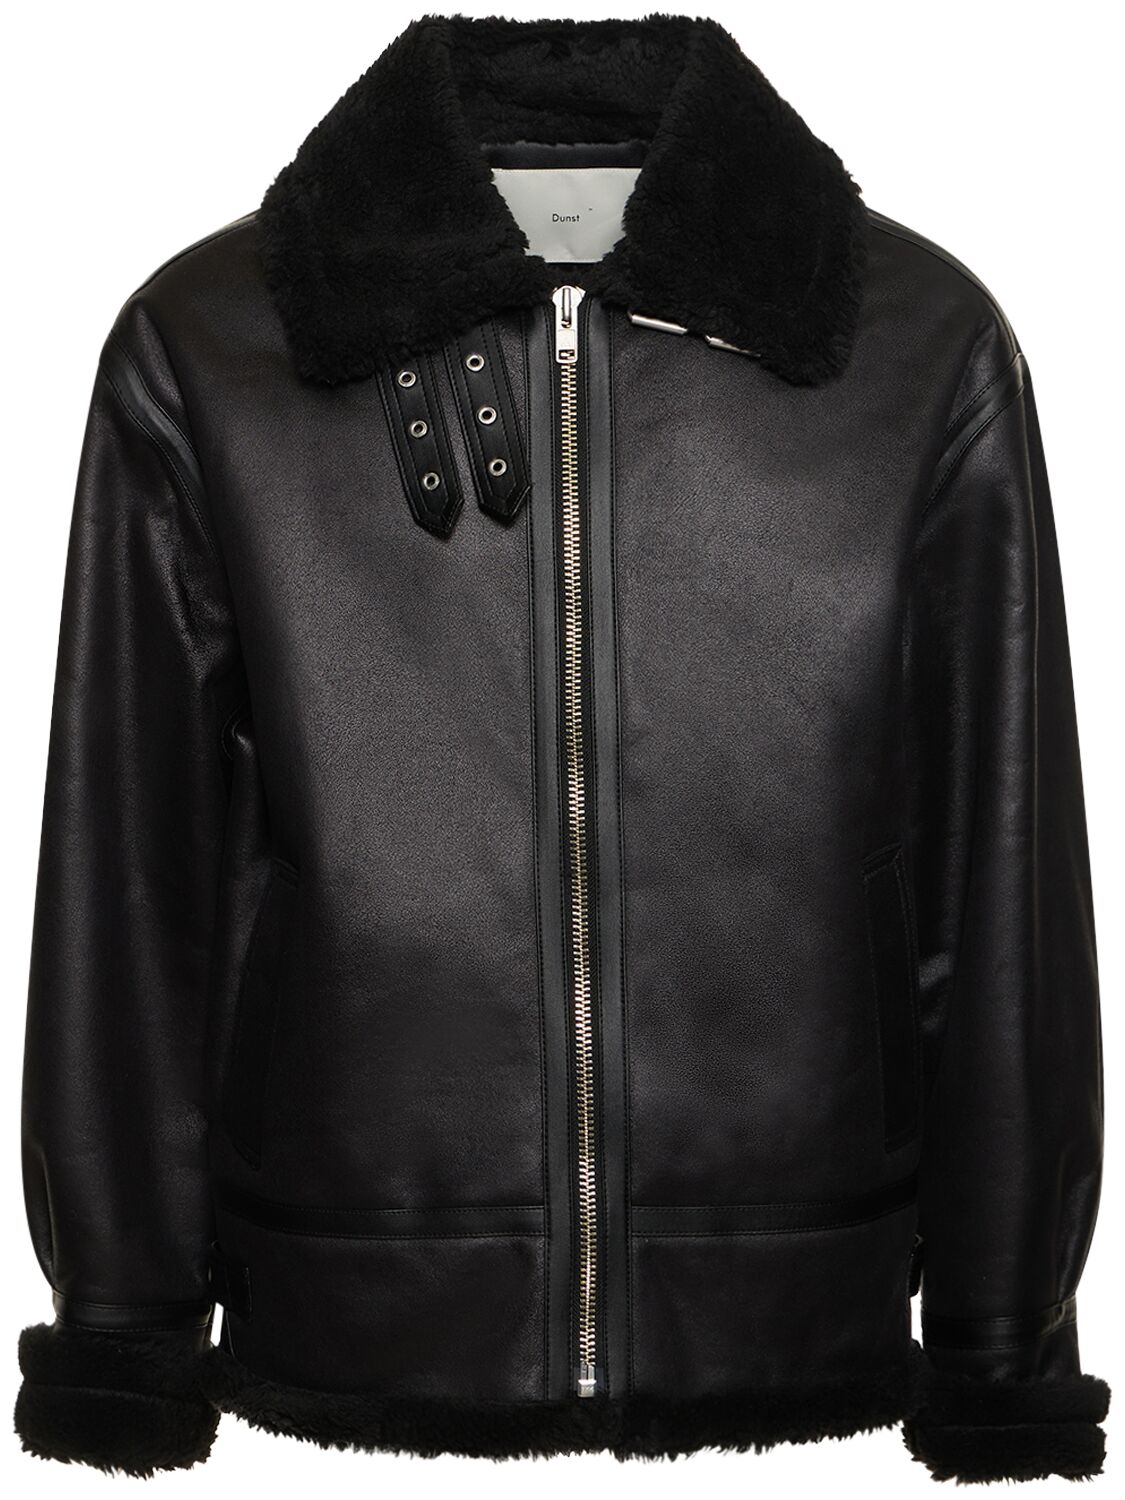 Unisex Loose Fit Shearling Jacket